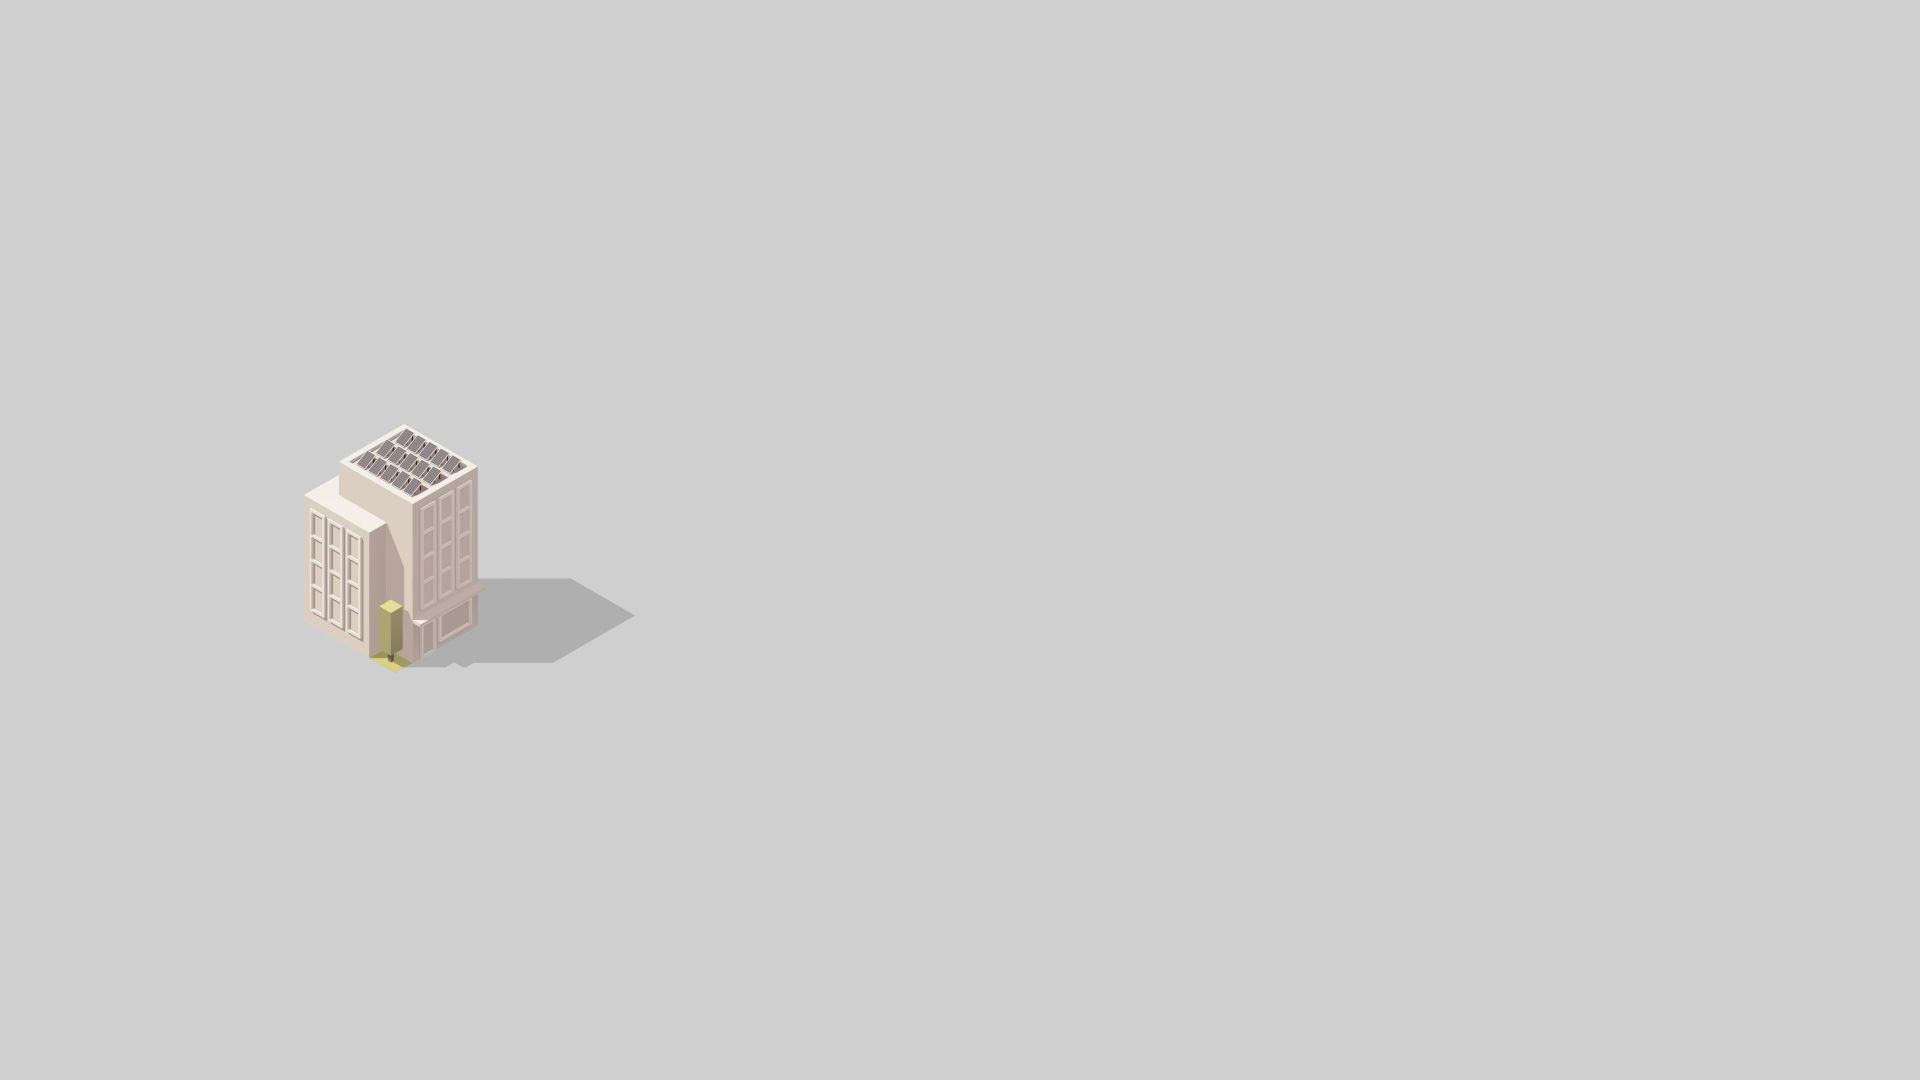 Illustration of small apartment building surrounded by empty space